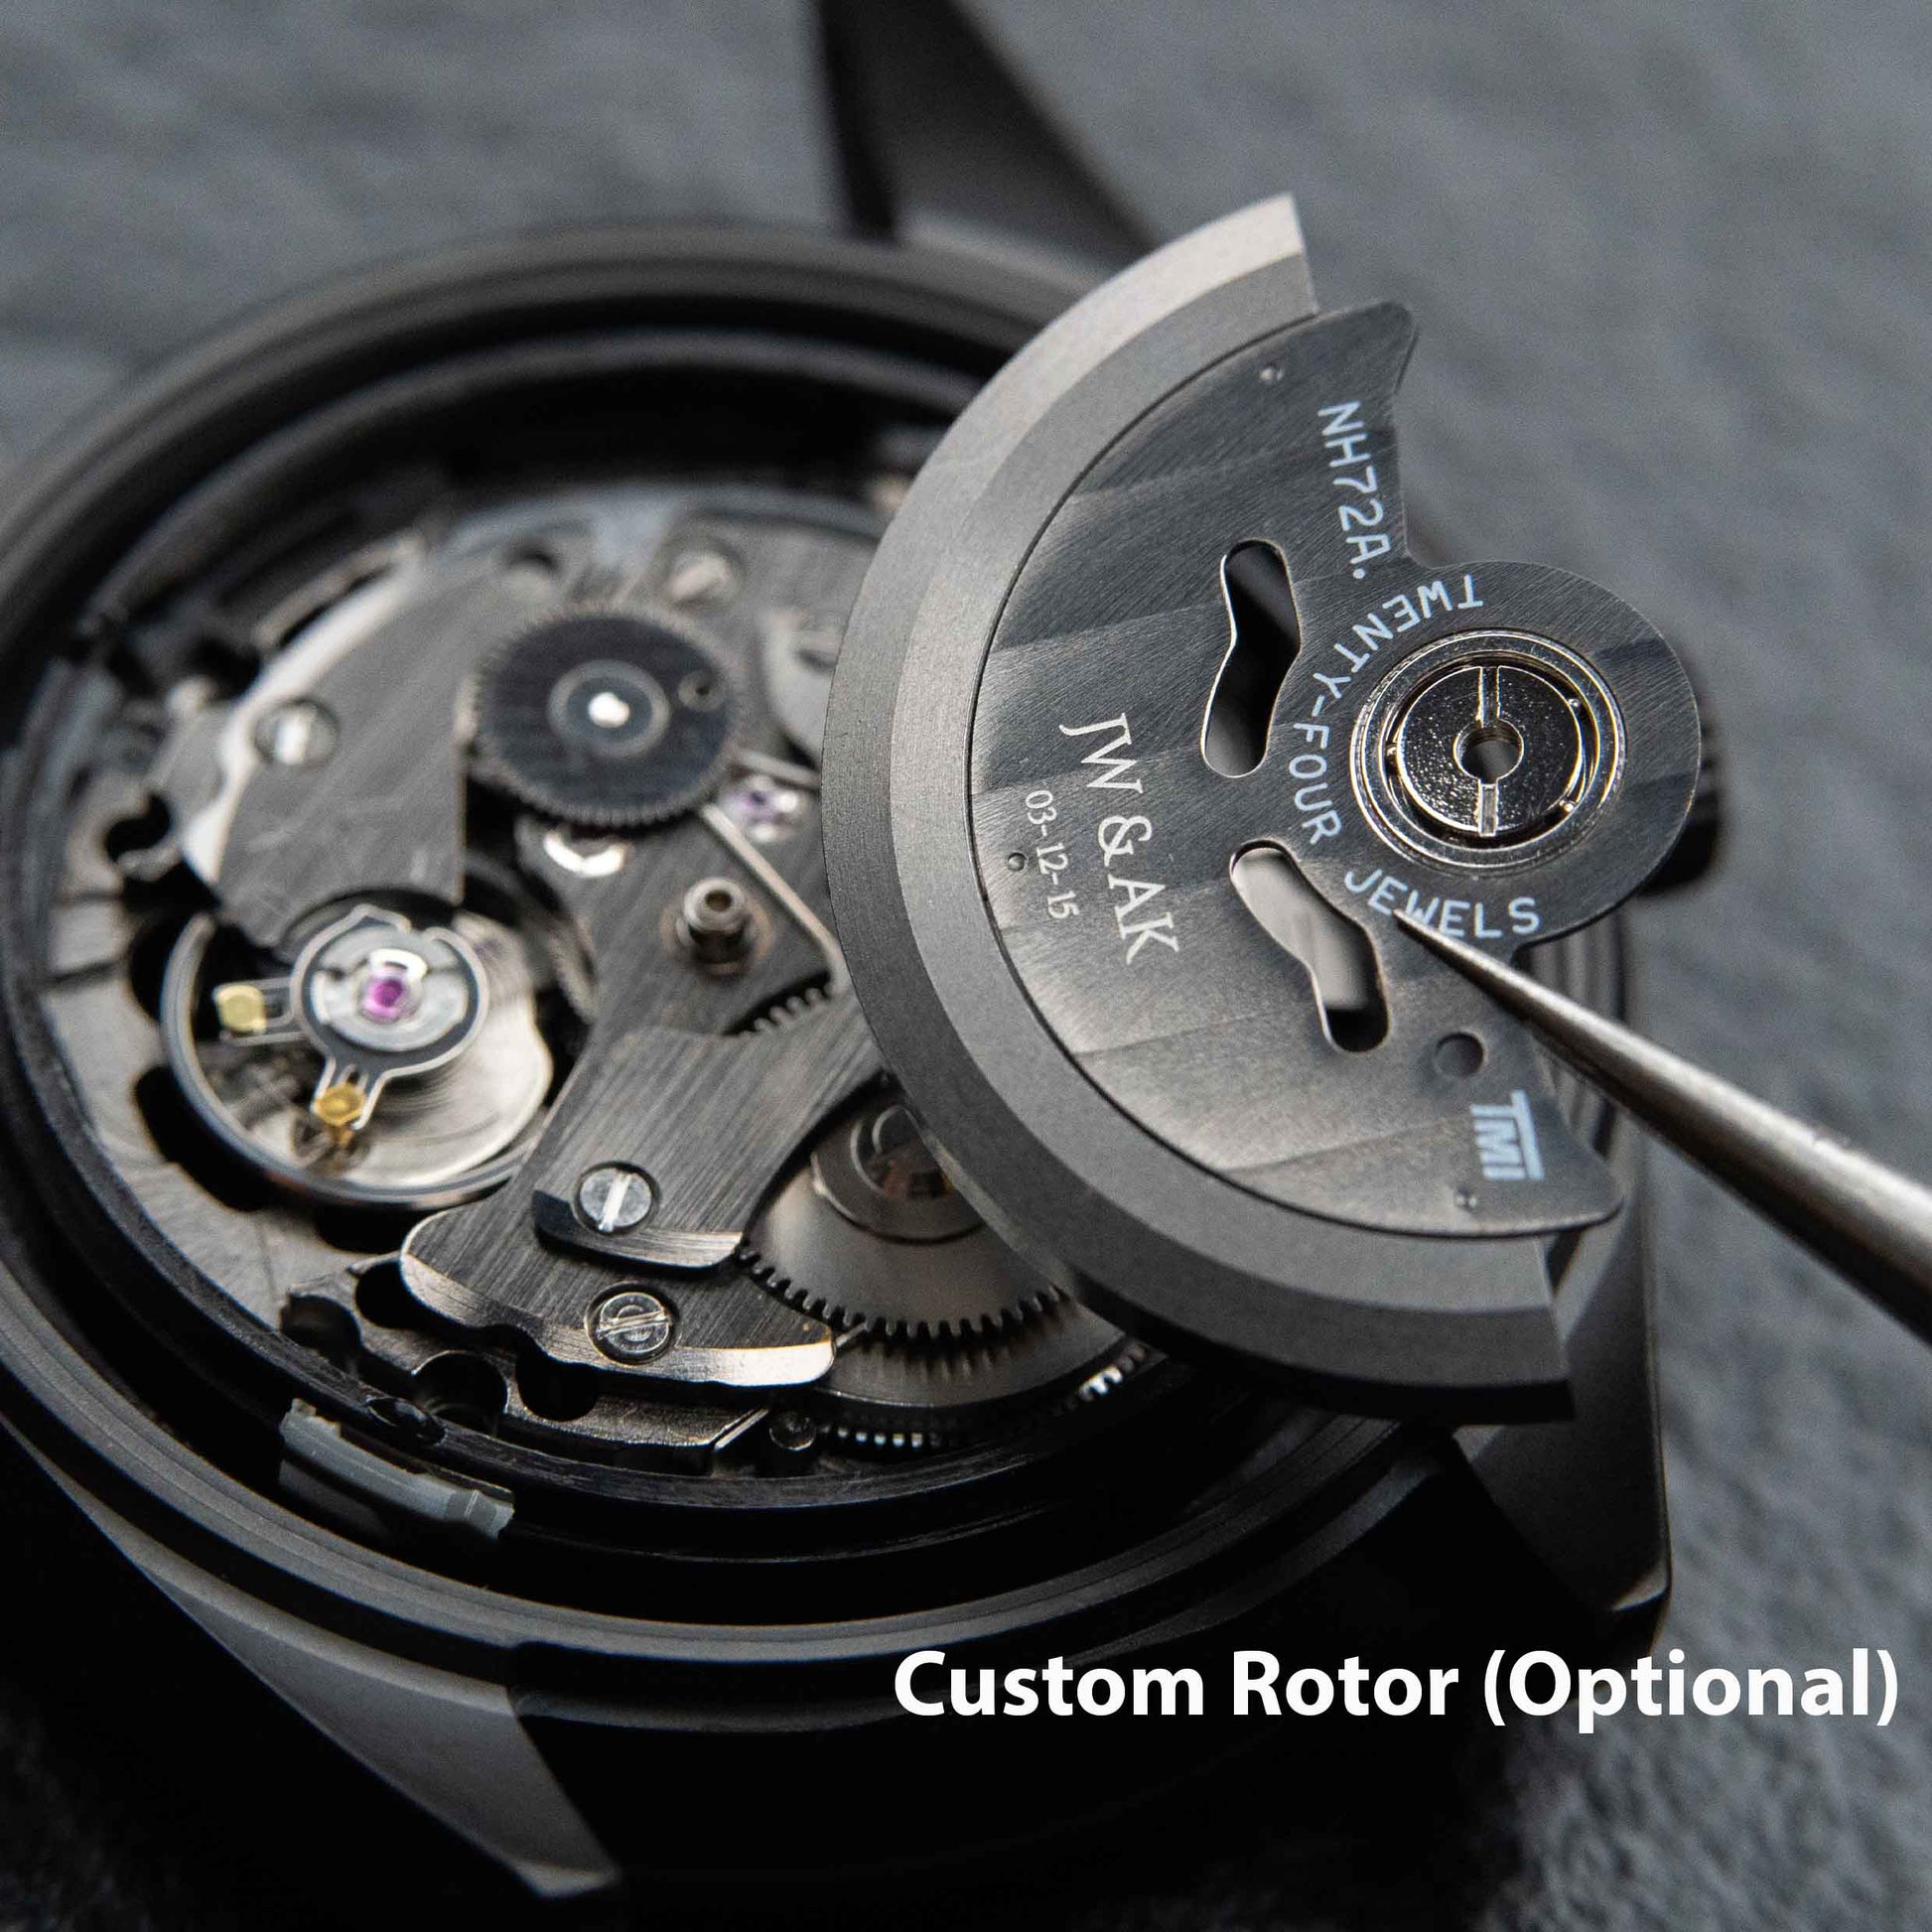 EONIQ expedition watch - custom watch with seiko movement and free name engraving - custom rotor 